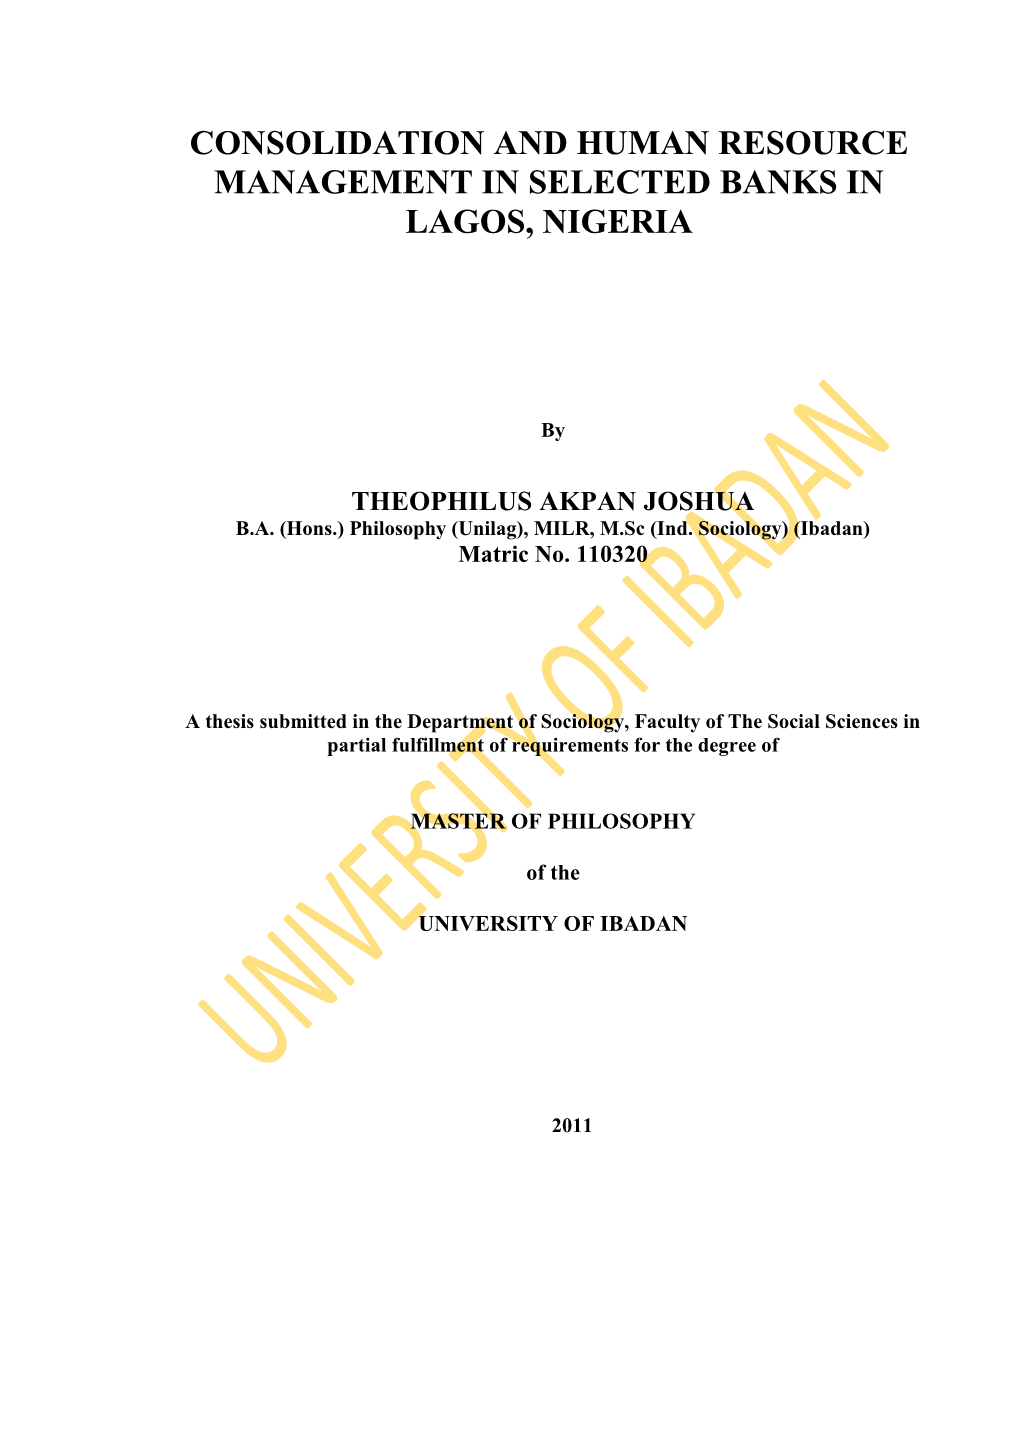 Consolidation and Human Resource Management in Selected Banks in Lagos, Nigeria